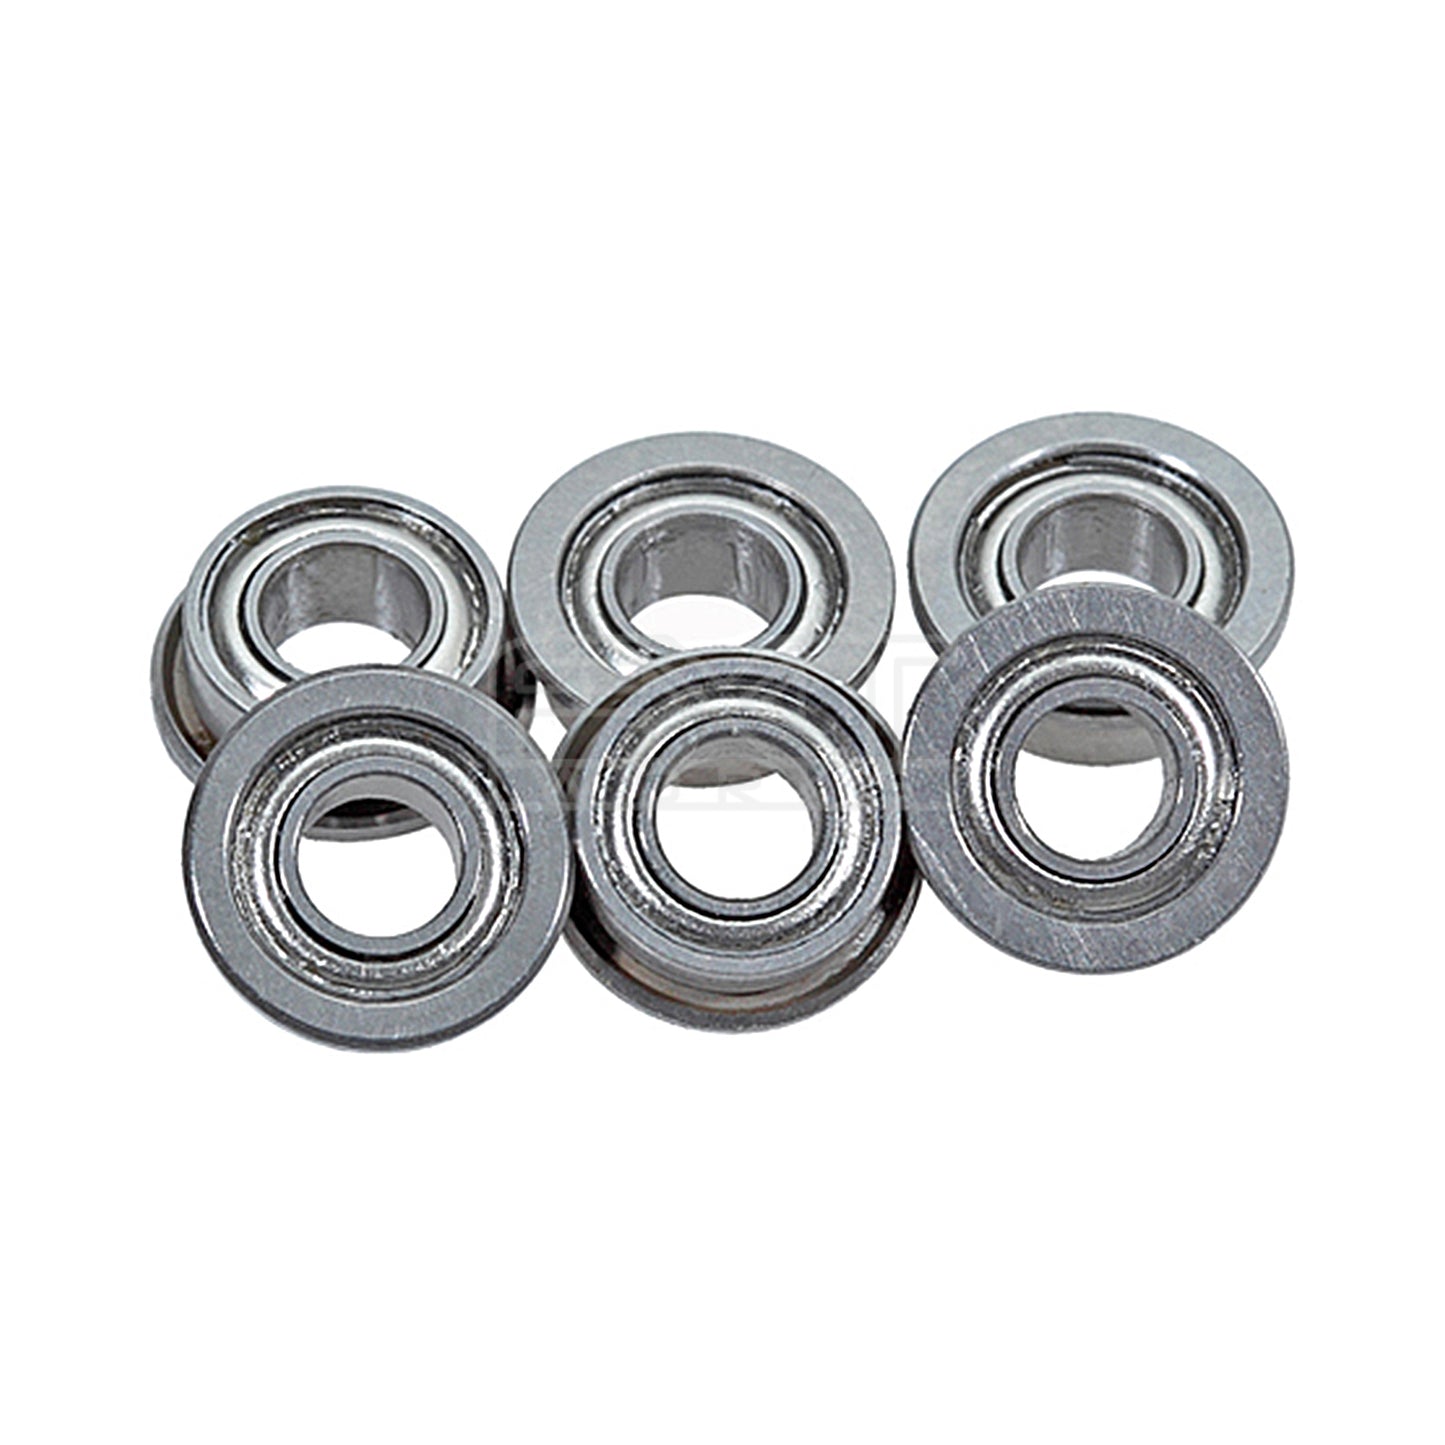 7mm Steel Bushing for Airsoft AEGs